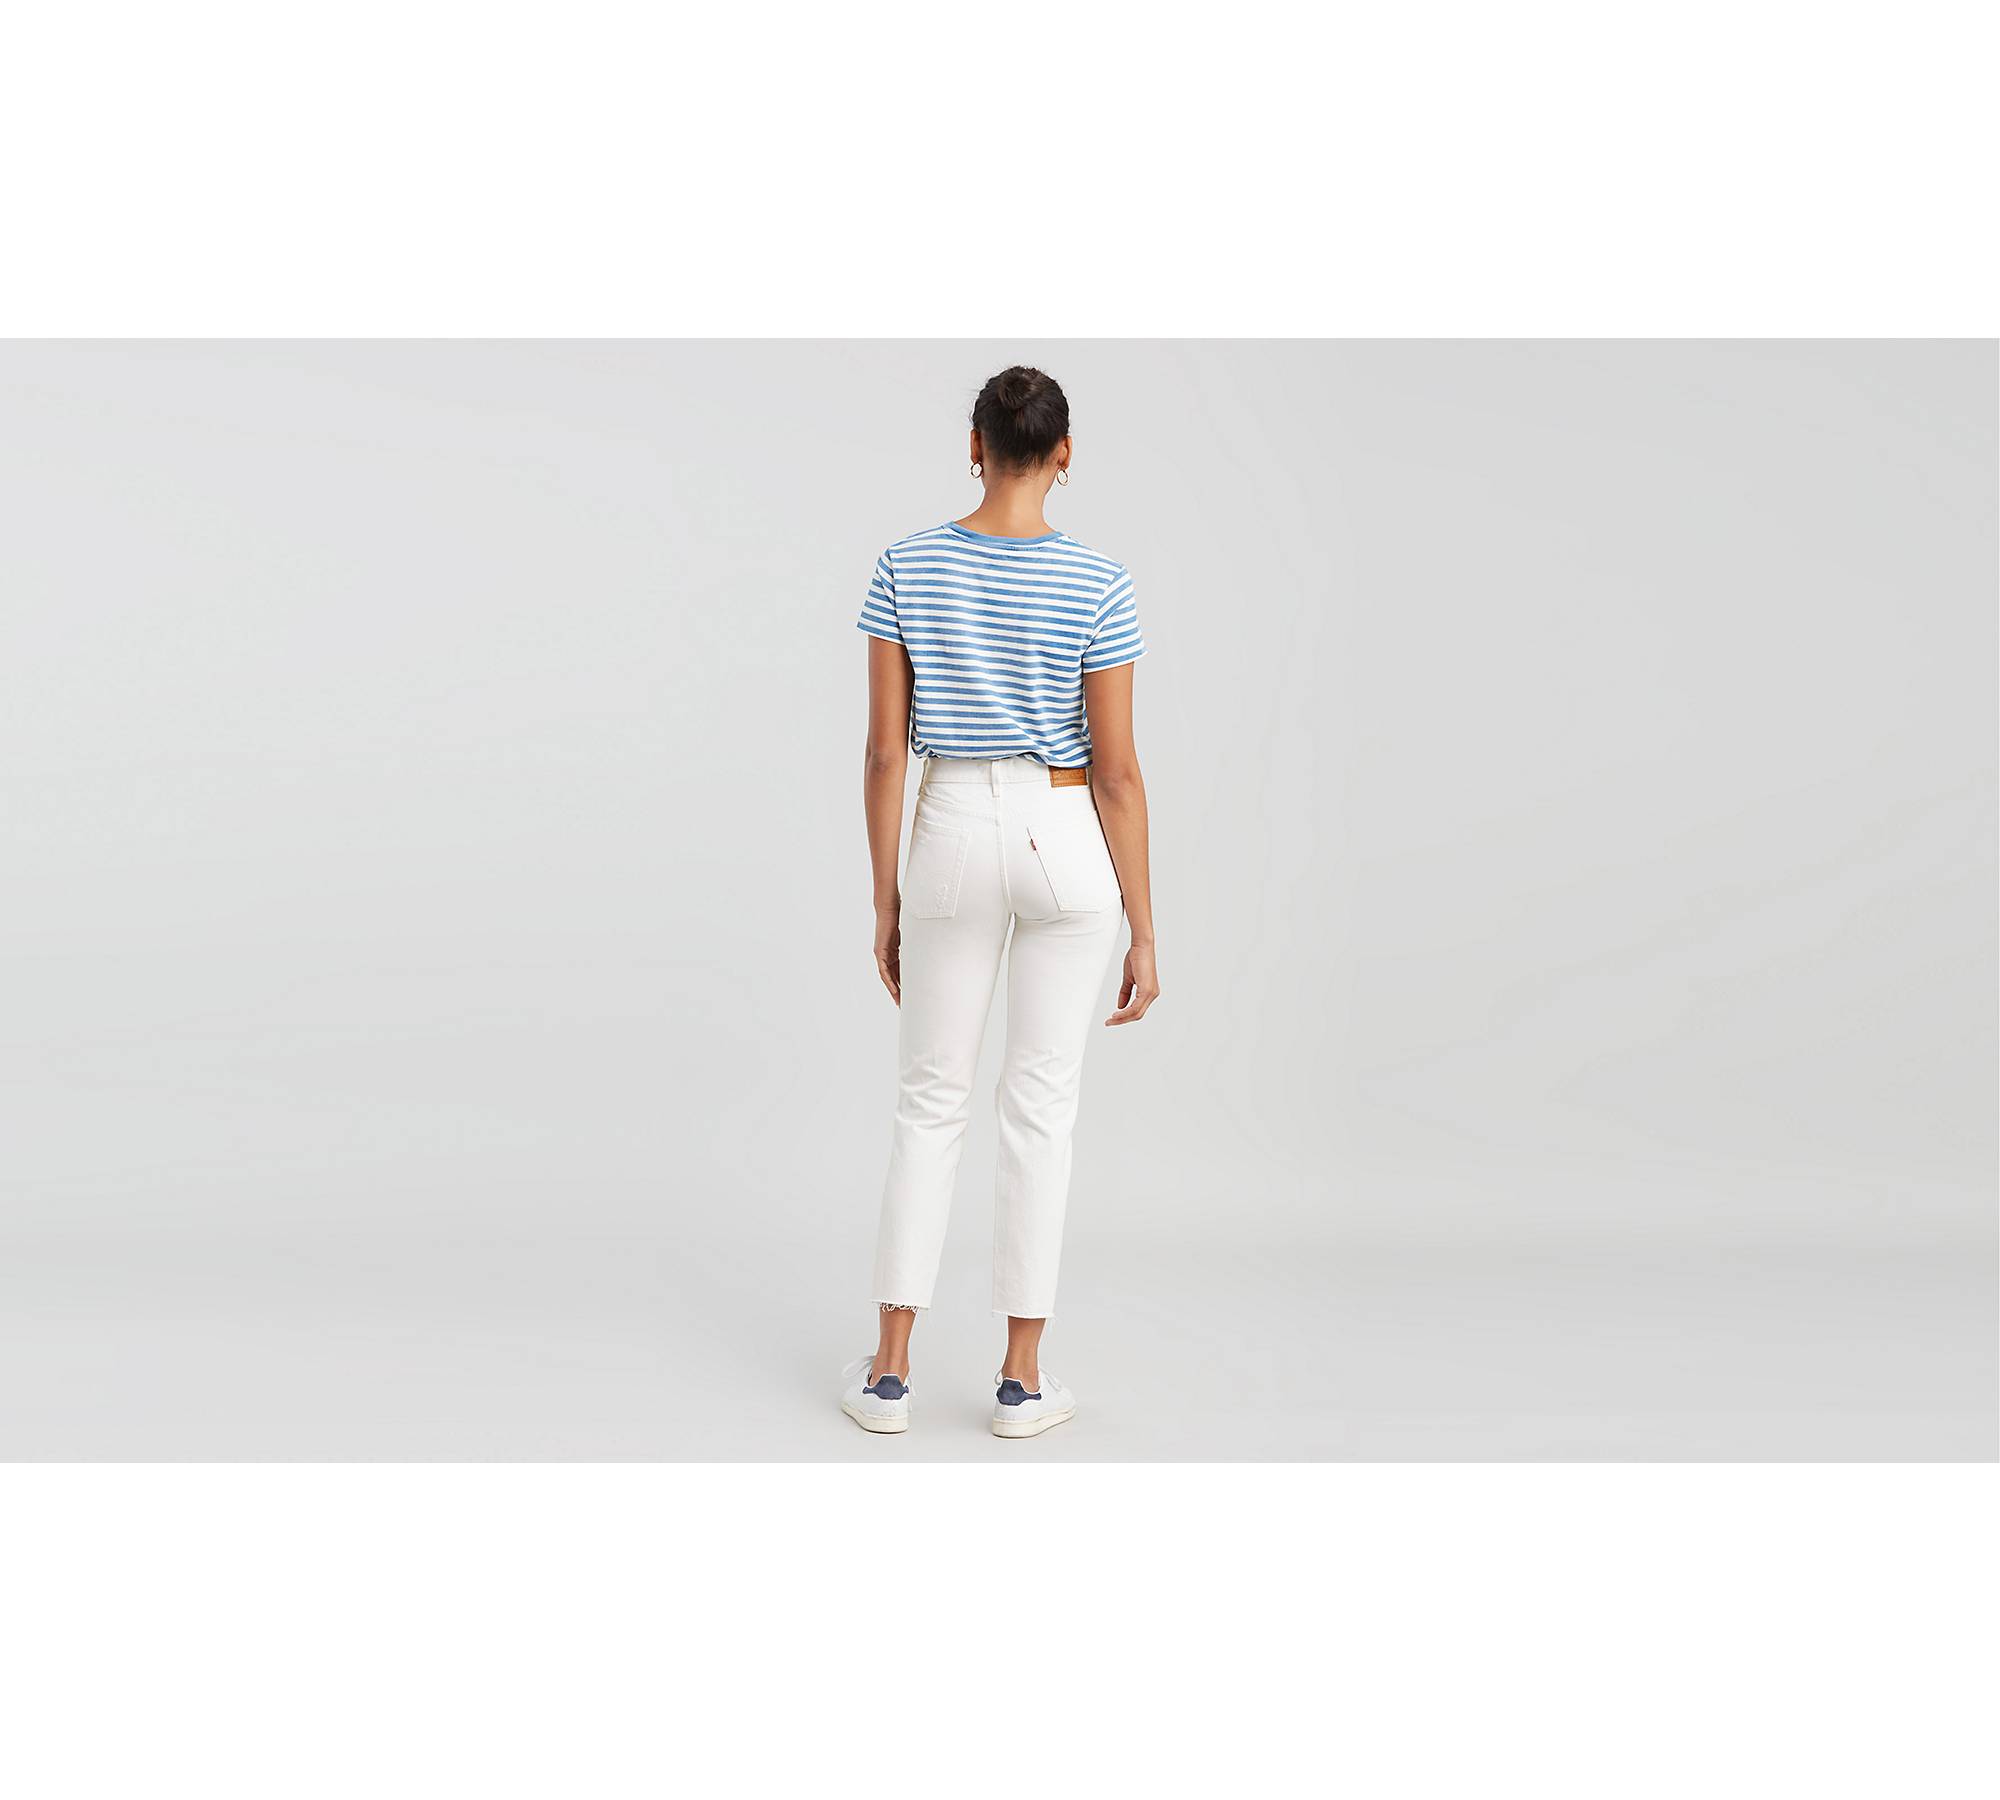 Wedgie Fit Ankle Women's Jeans - White | Levi's® CA